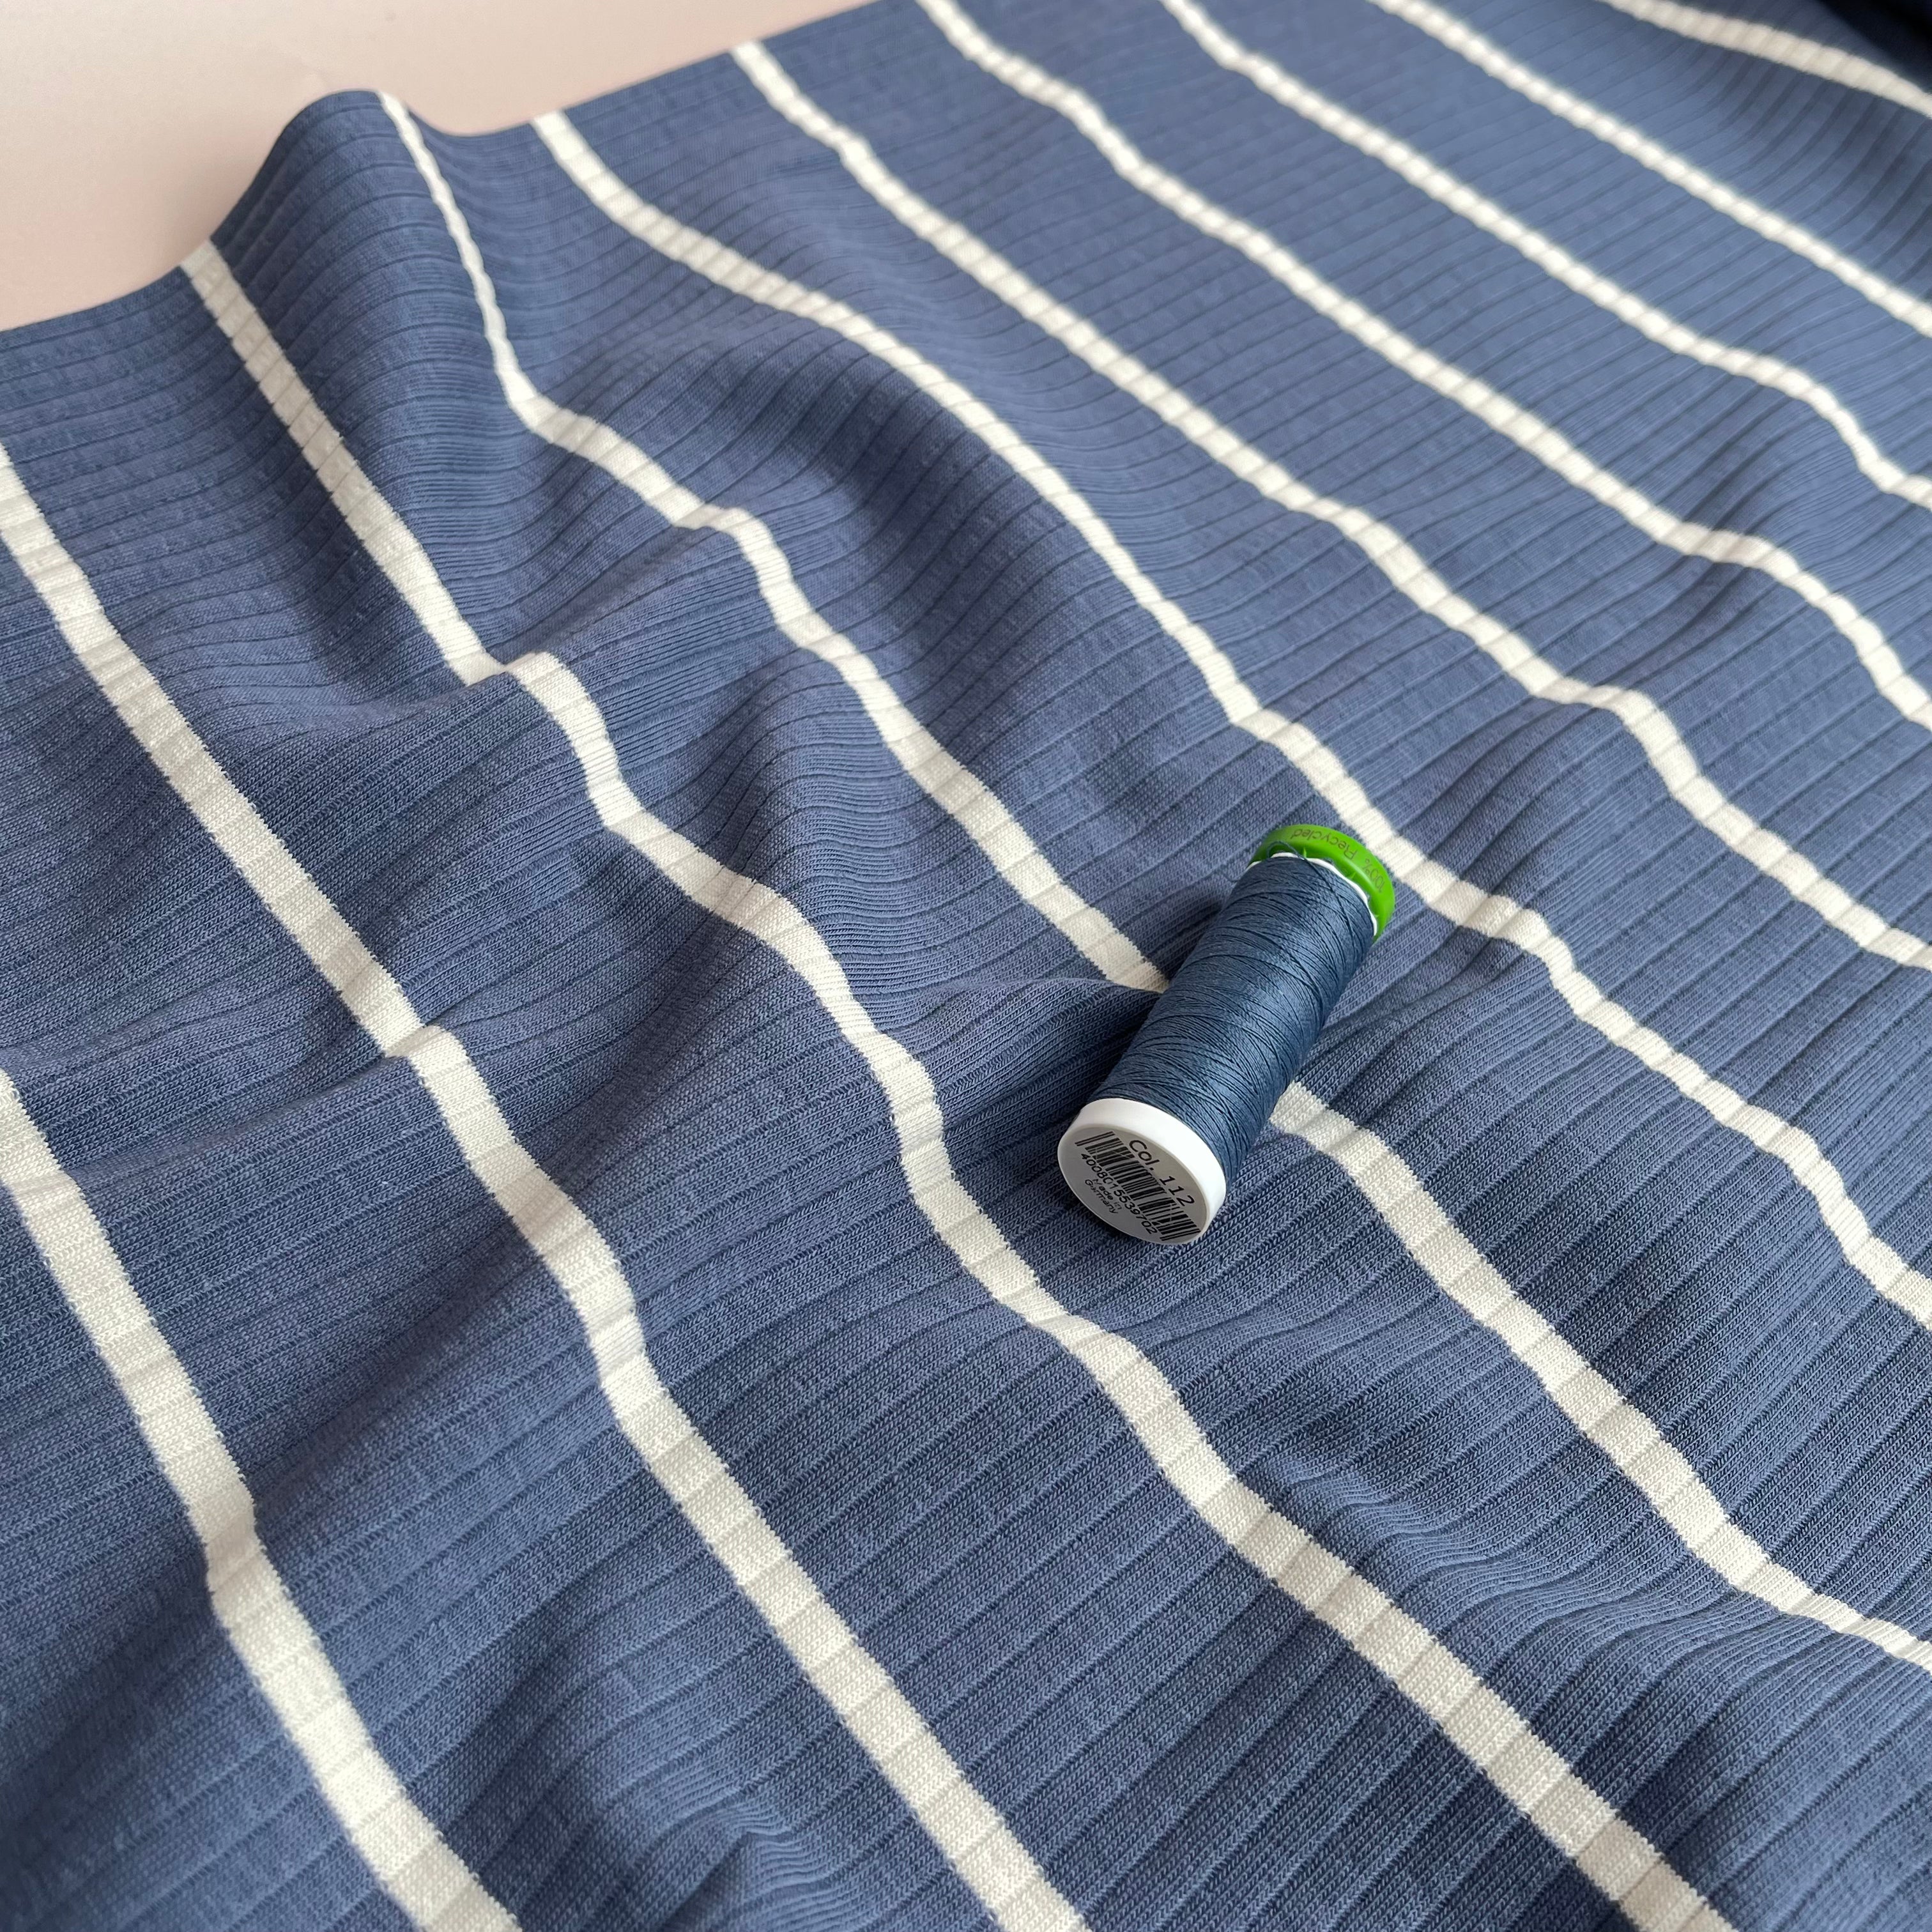 Yarn Dyed Striped Cotton Ribbed Jersey in Blue & Off-white